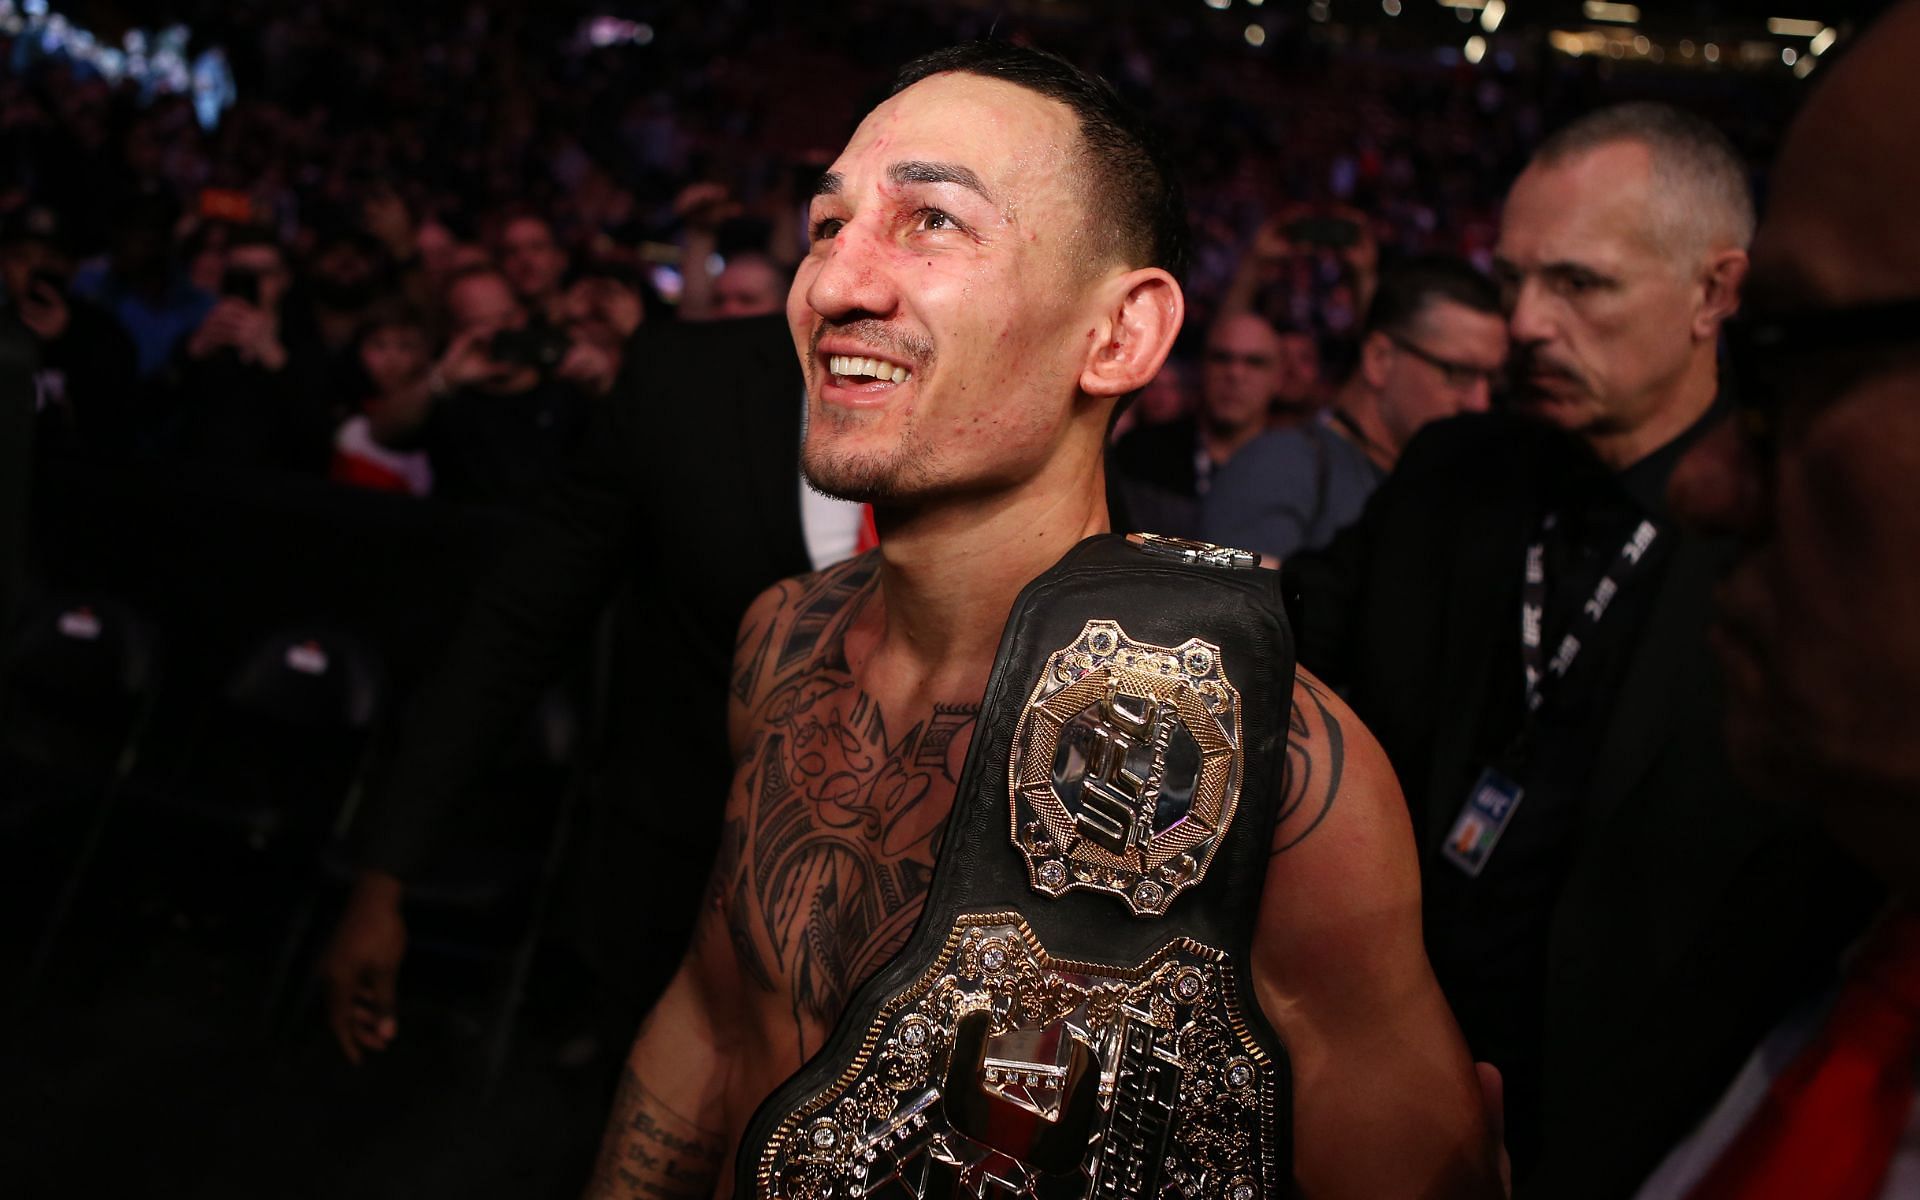 Max Holloway was the UFC featherweight champion from June 2017 to December 2019